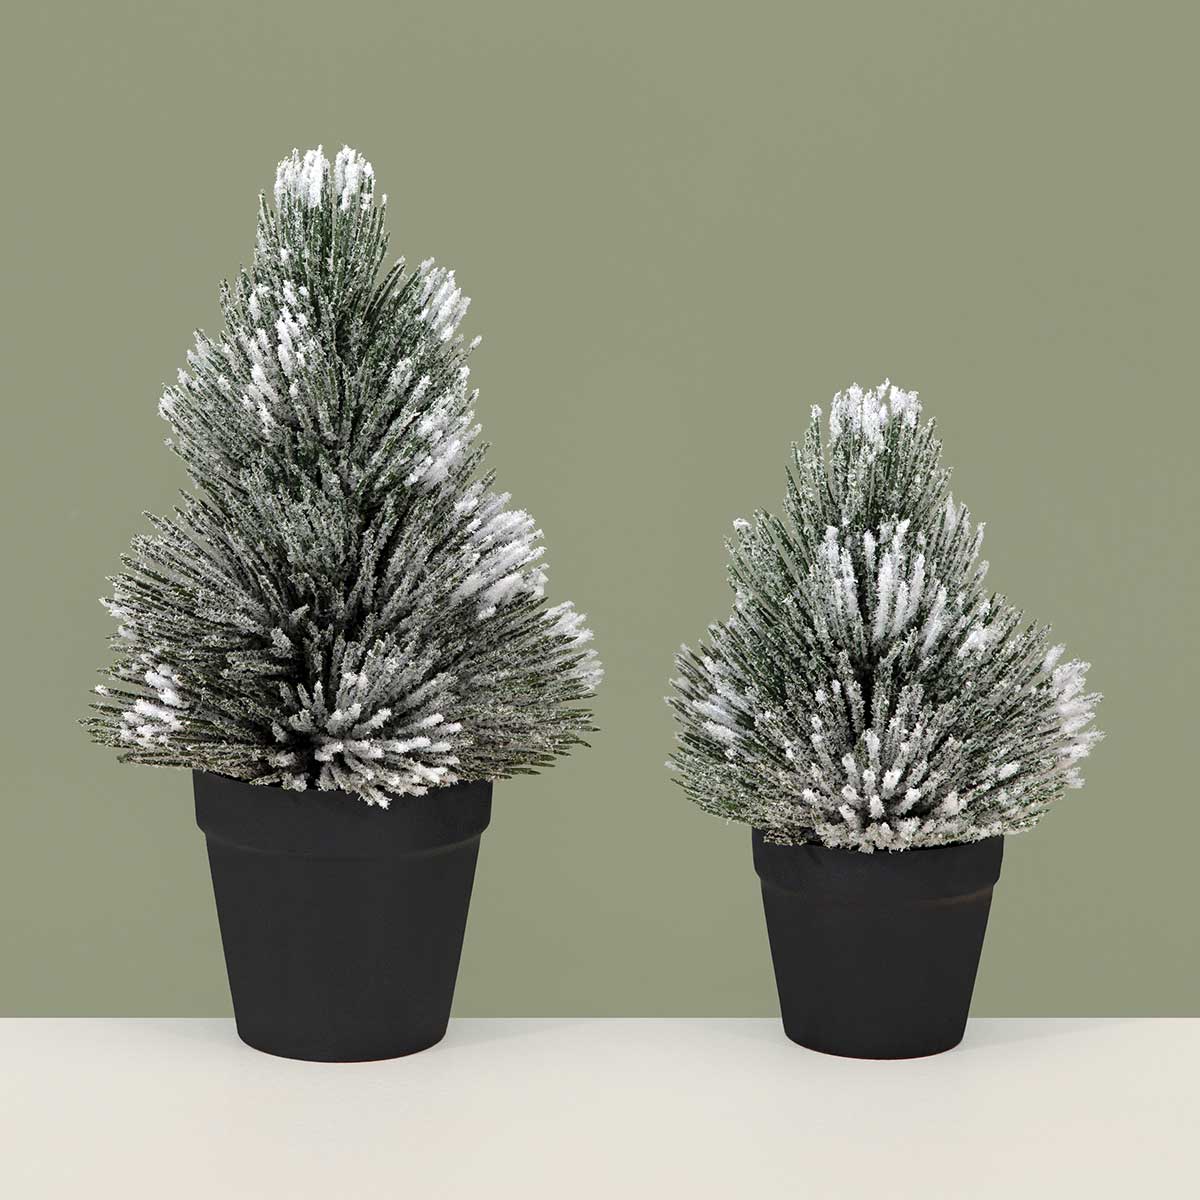 TREE PINE WITH SNOW SMALL 5IN X 8IN IN BLACK POT PLASTIC